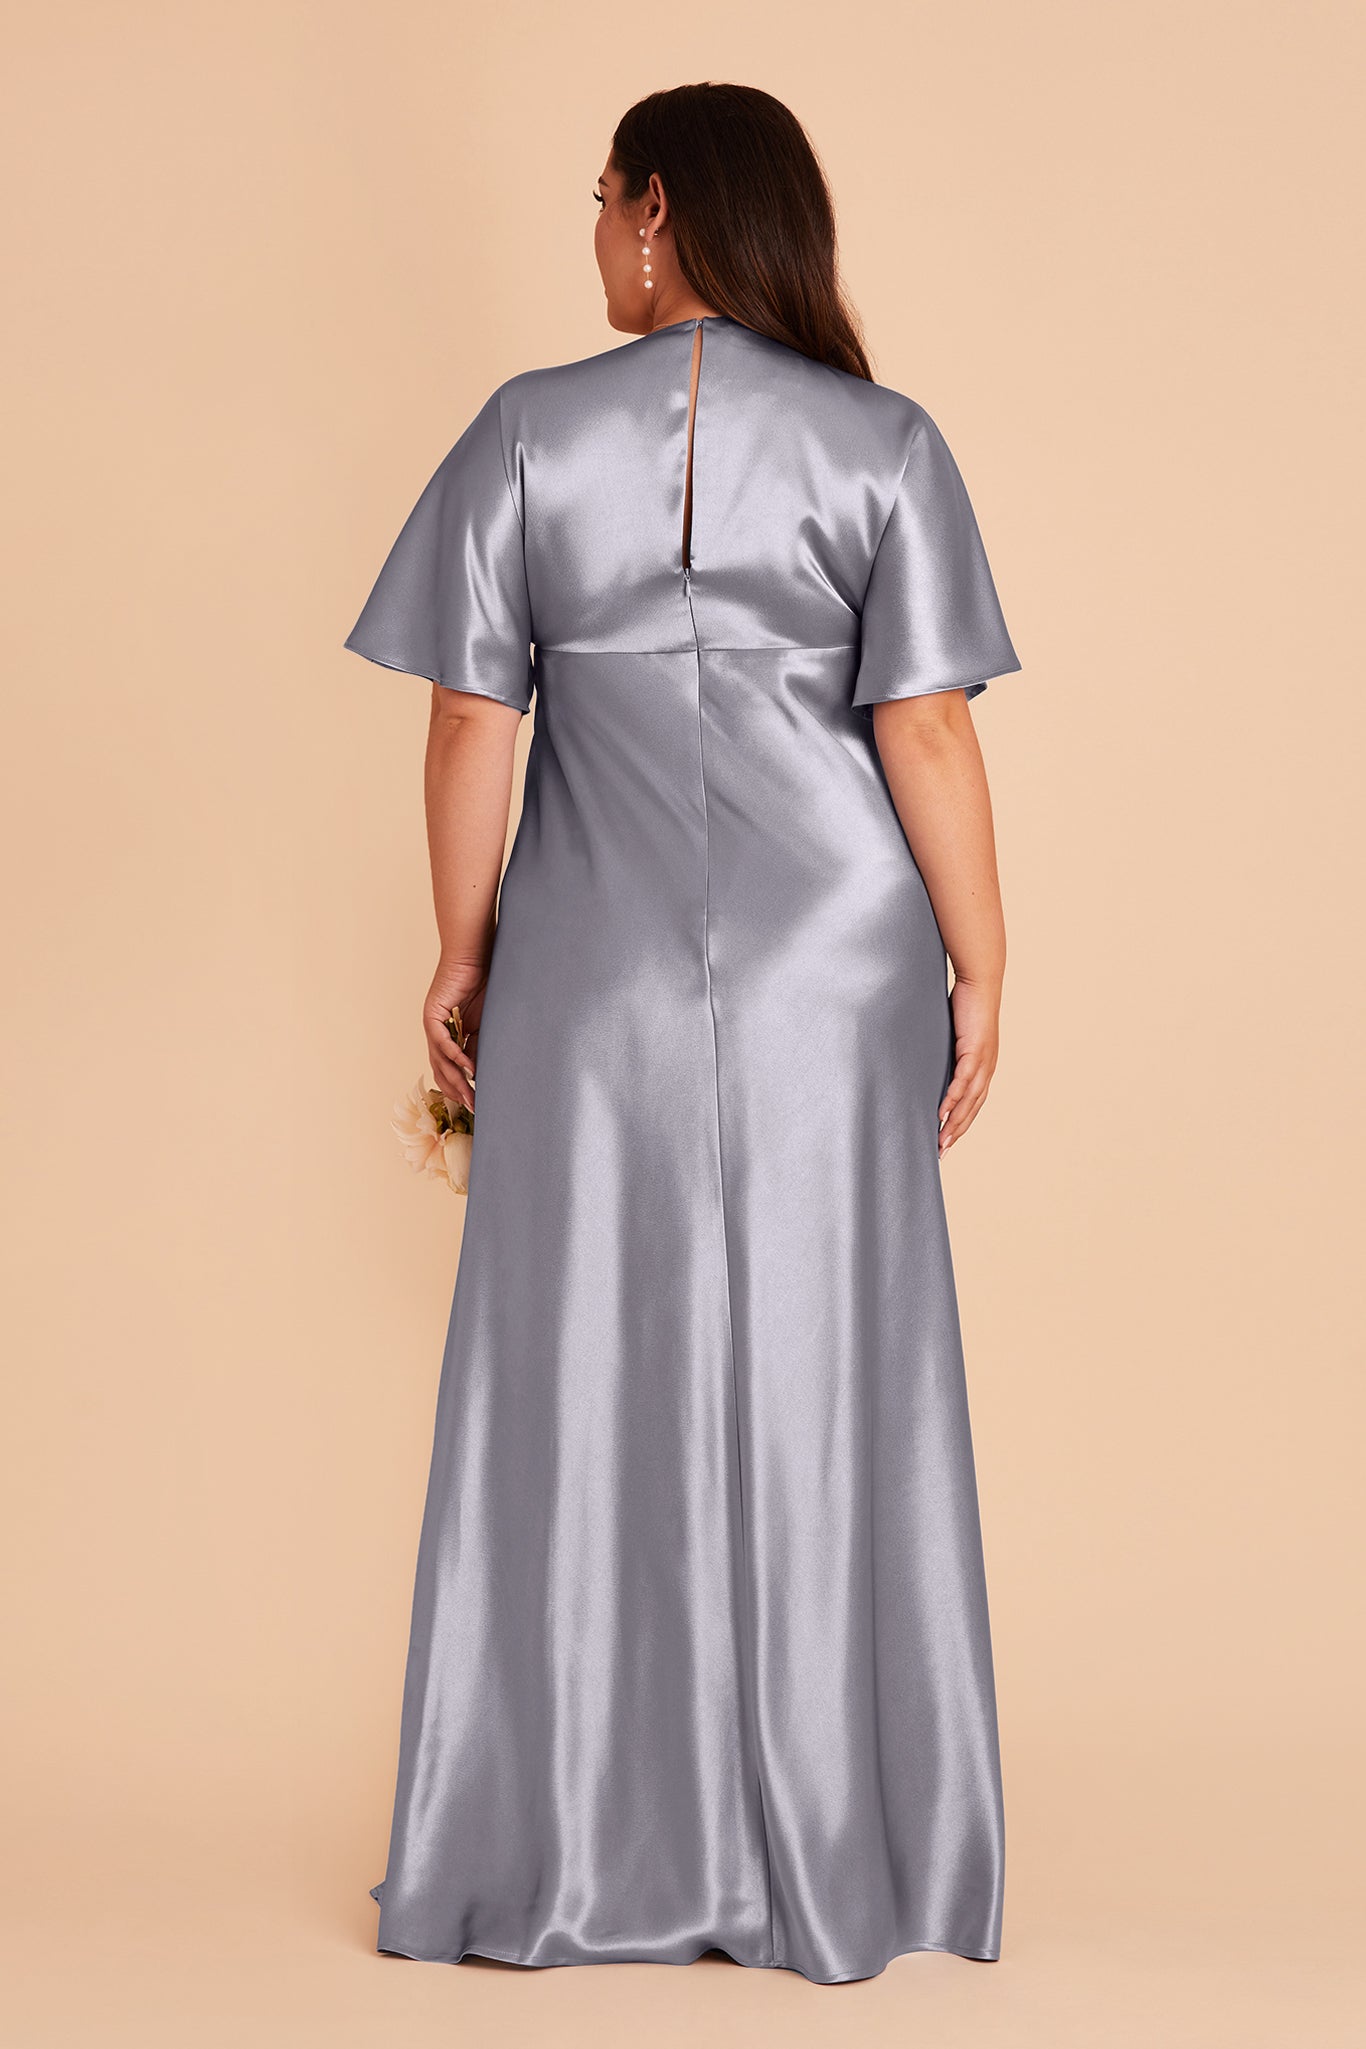 Jesse plus size bridesmaid dress with slit in dusty blue satin by Birdy Grey, back view